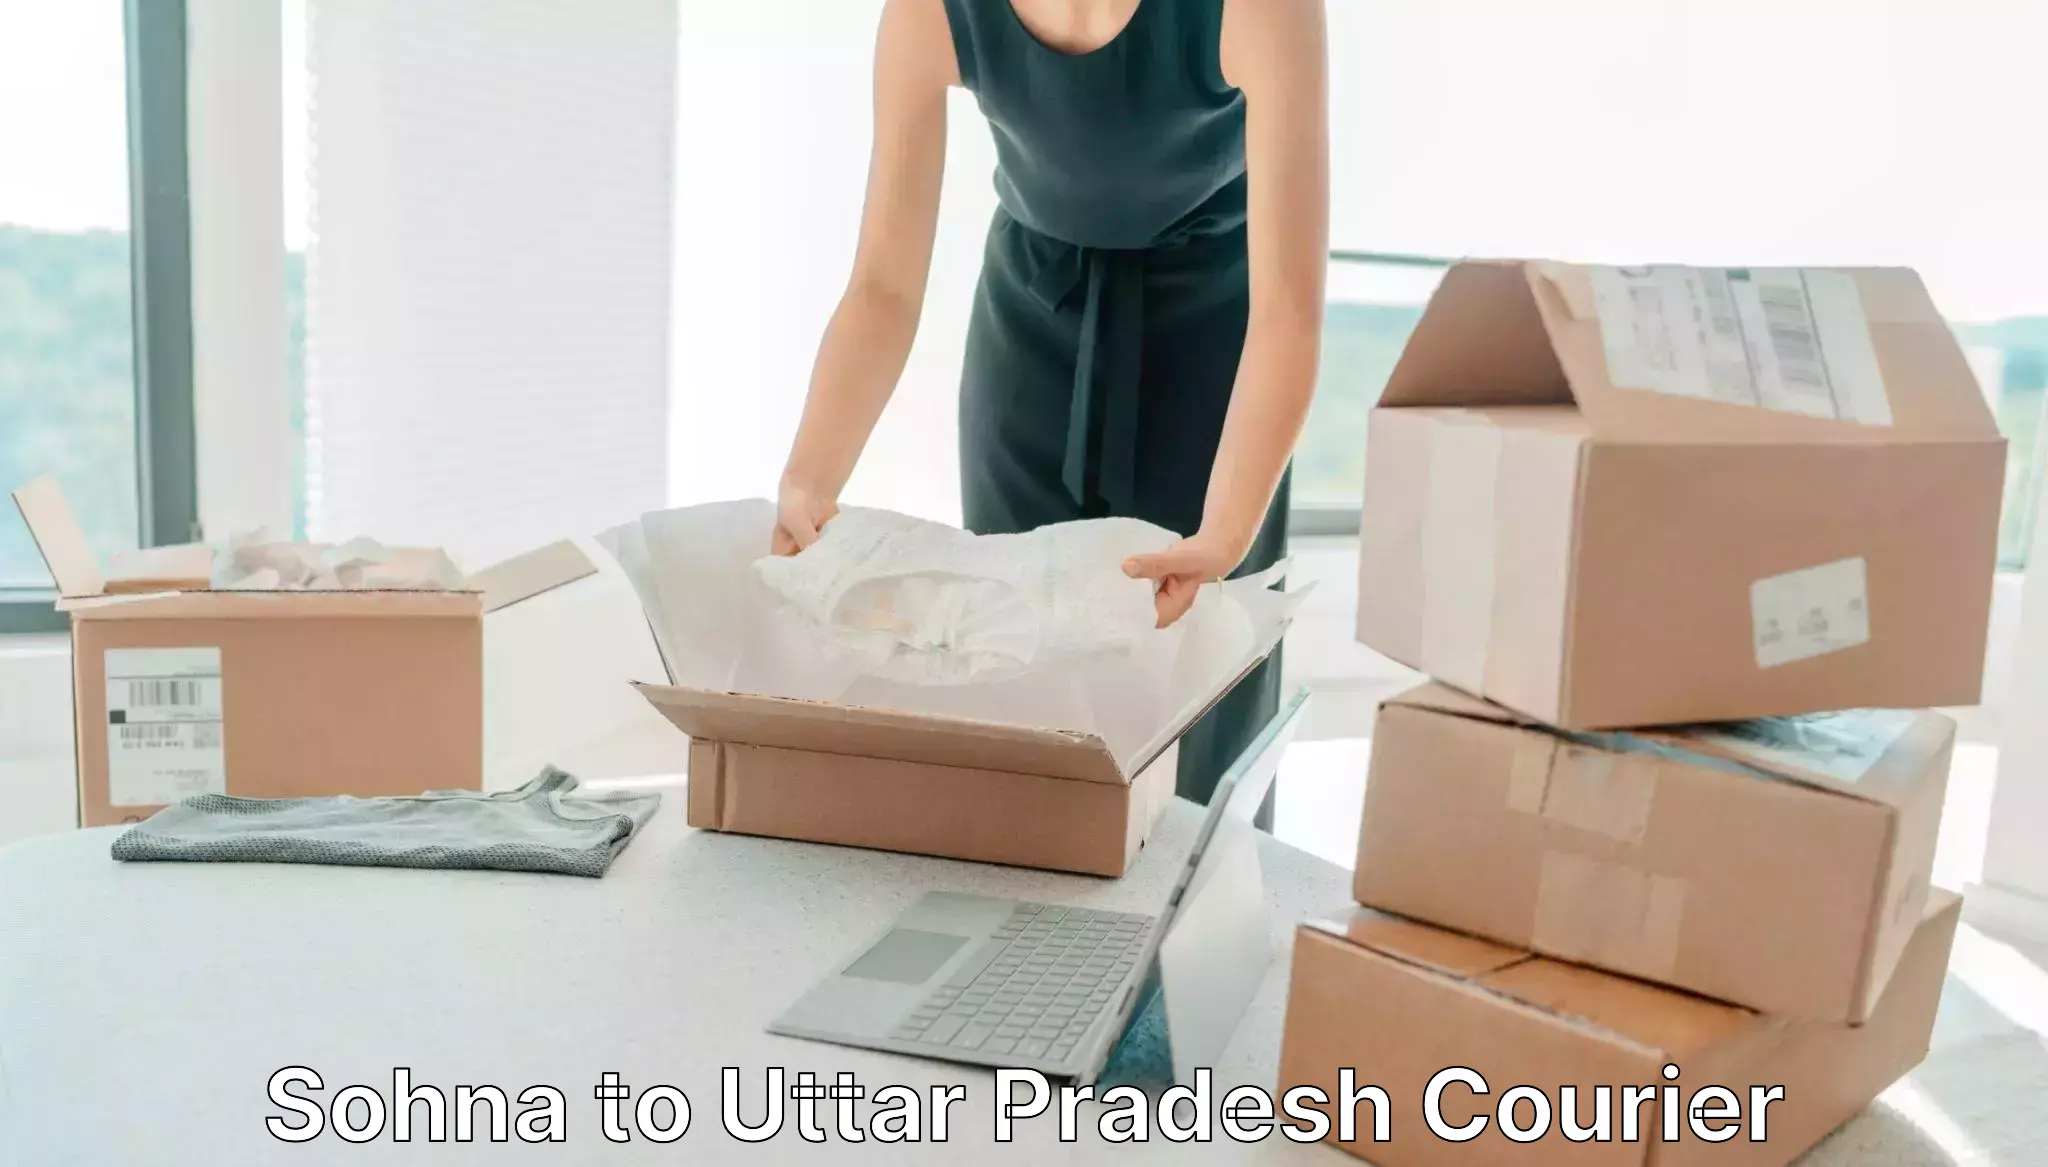 Subscription-based courier Sohna to Lucknow